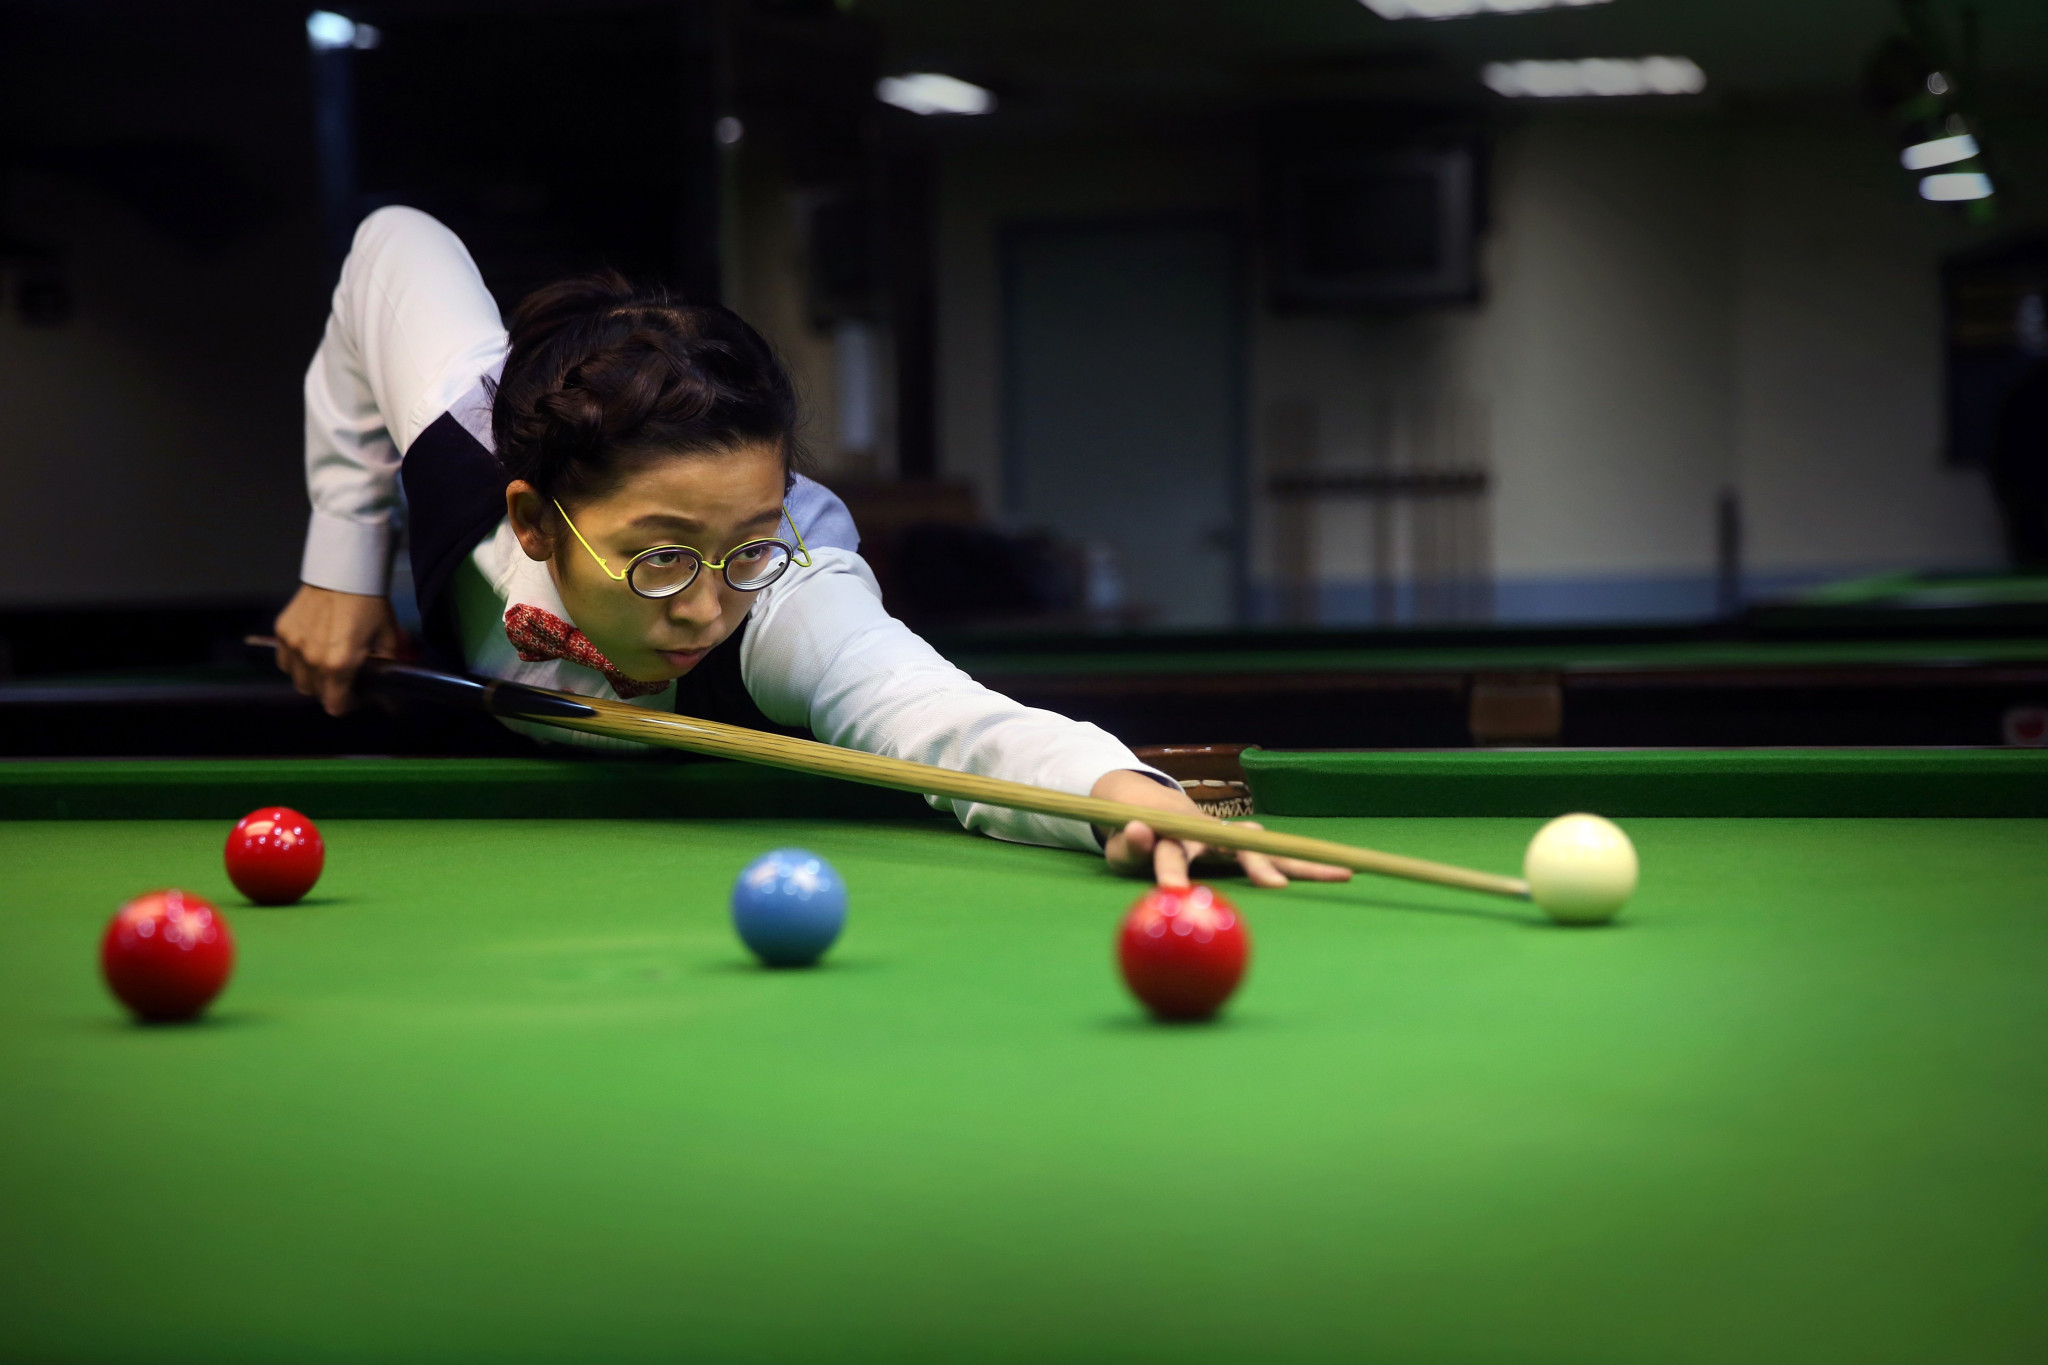 Defending champion Evans and three-time winner Yee knocked out on day of shocks at World Women’s Snooker Championship